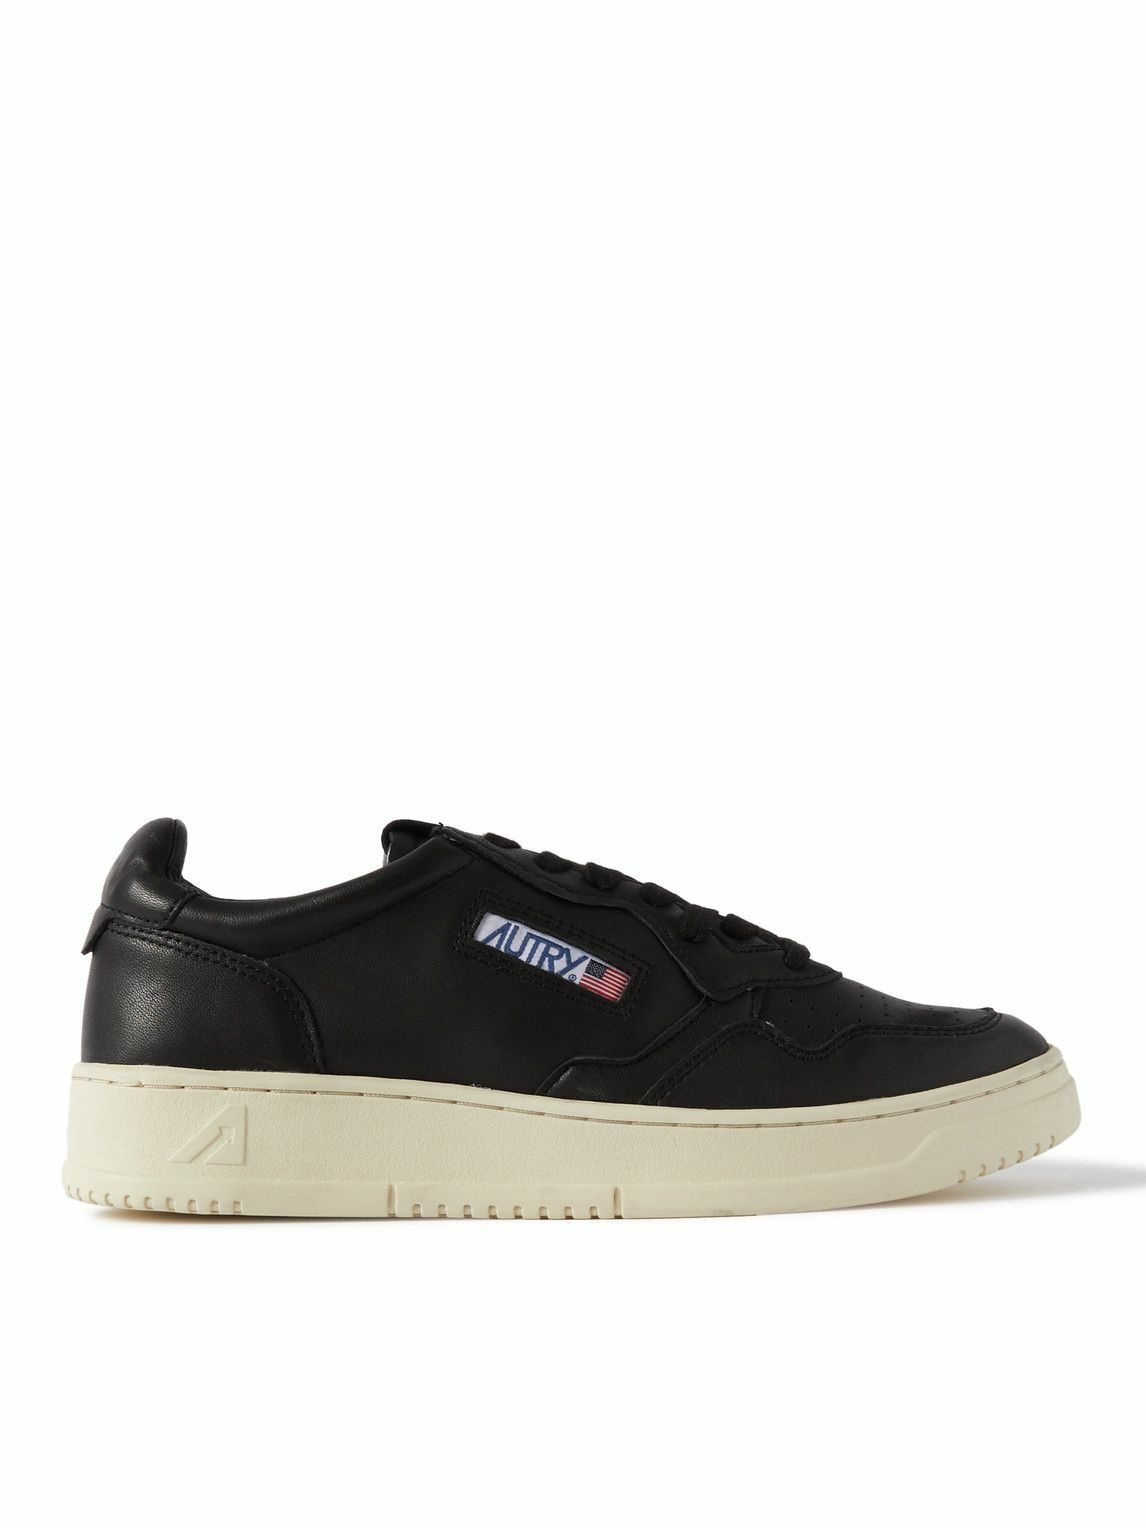 Autry - Medalist Leather Sneakers - Black Autry